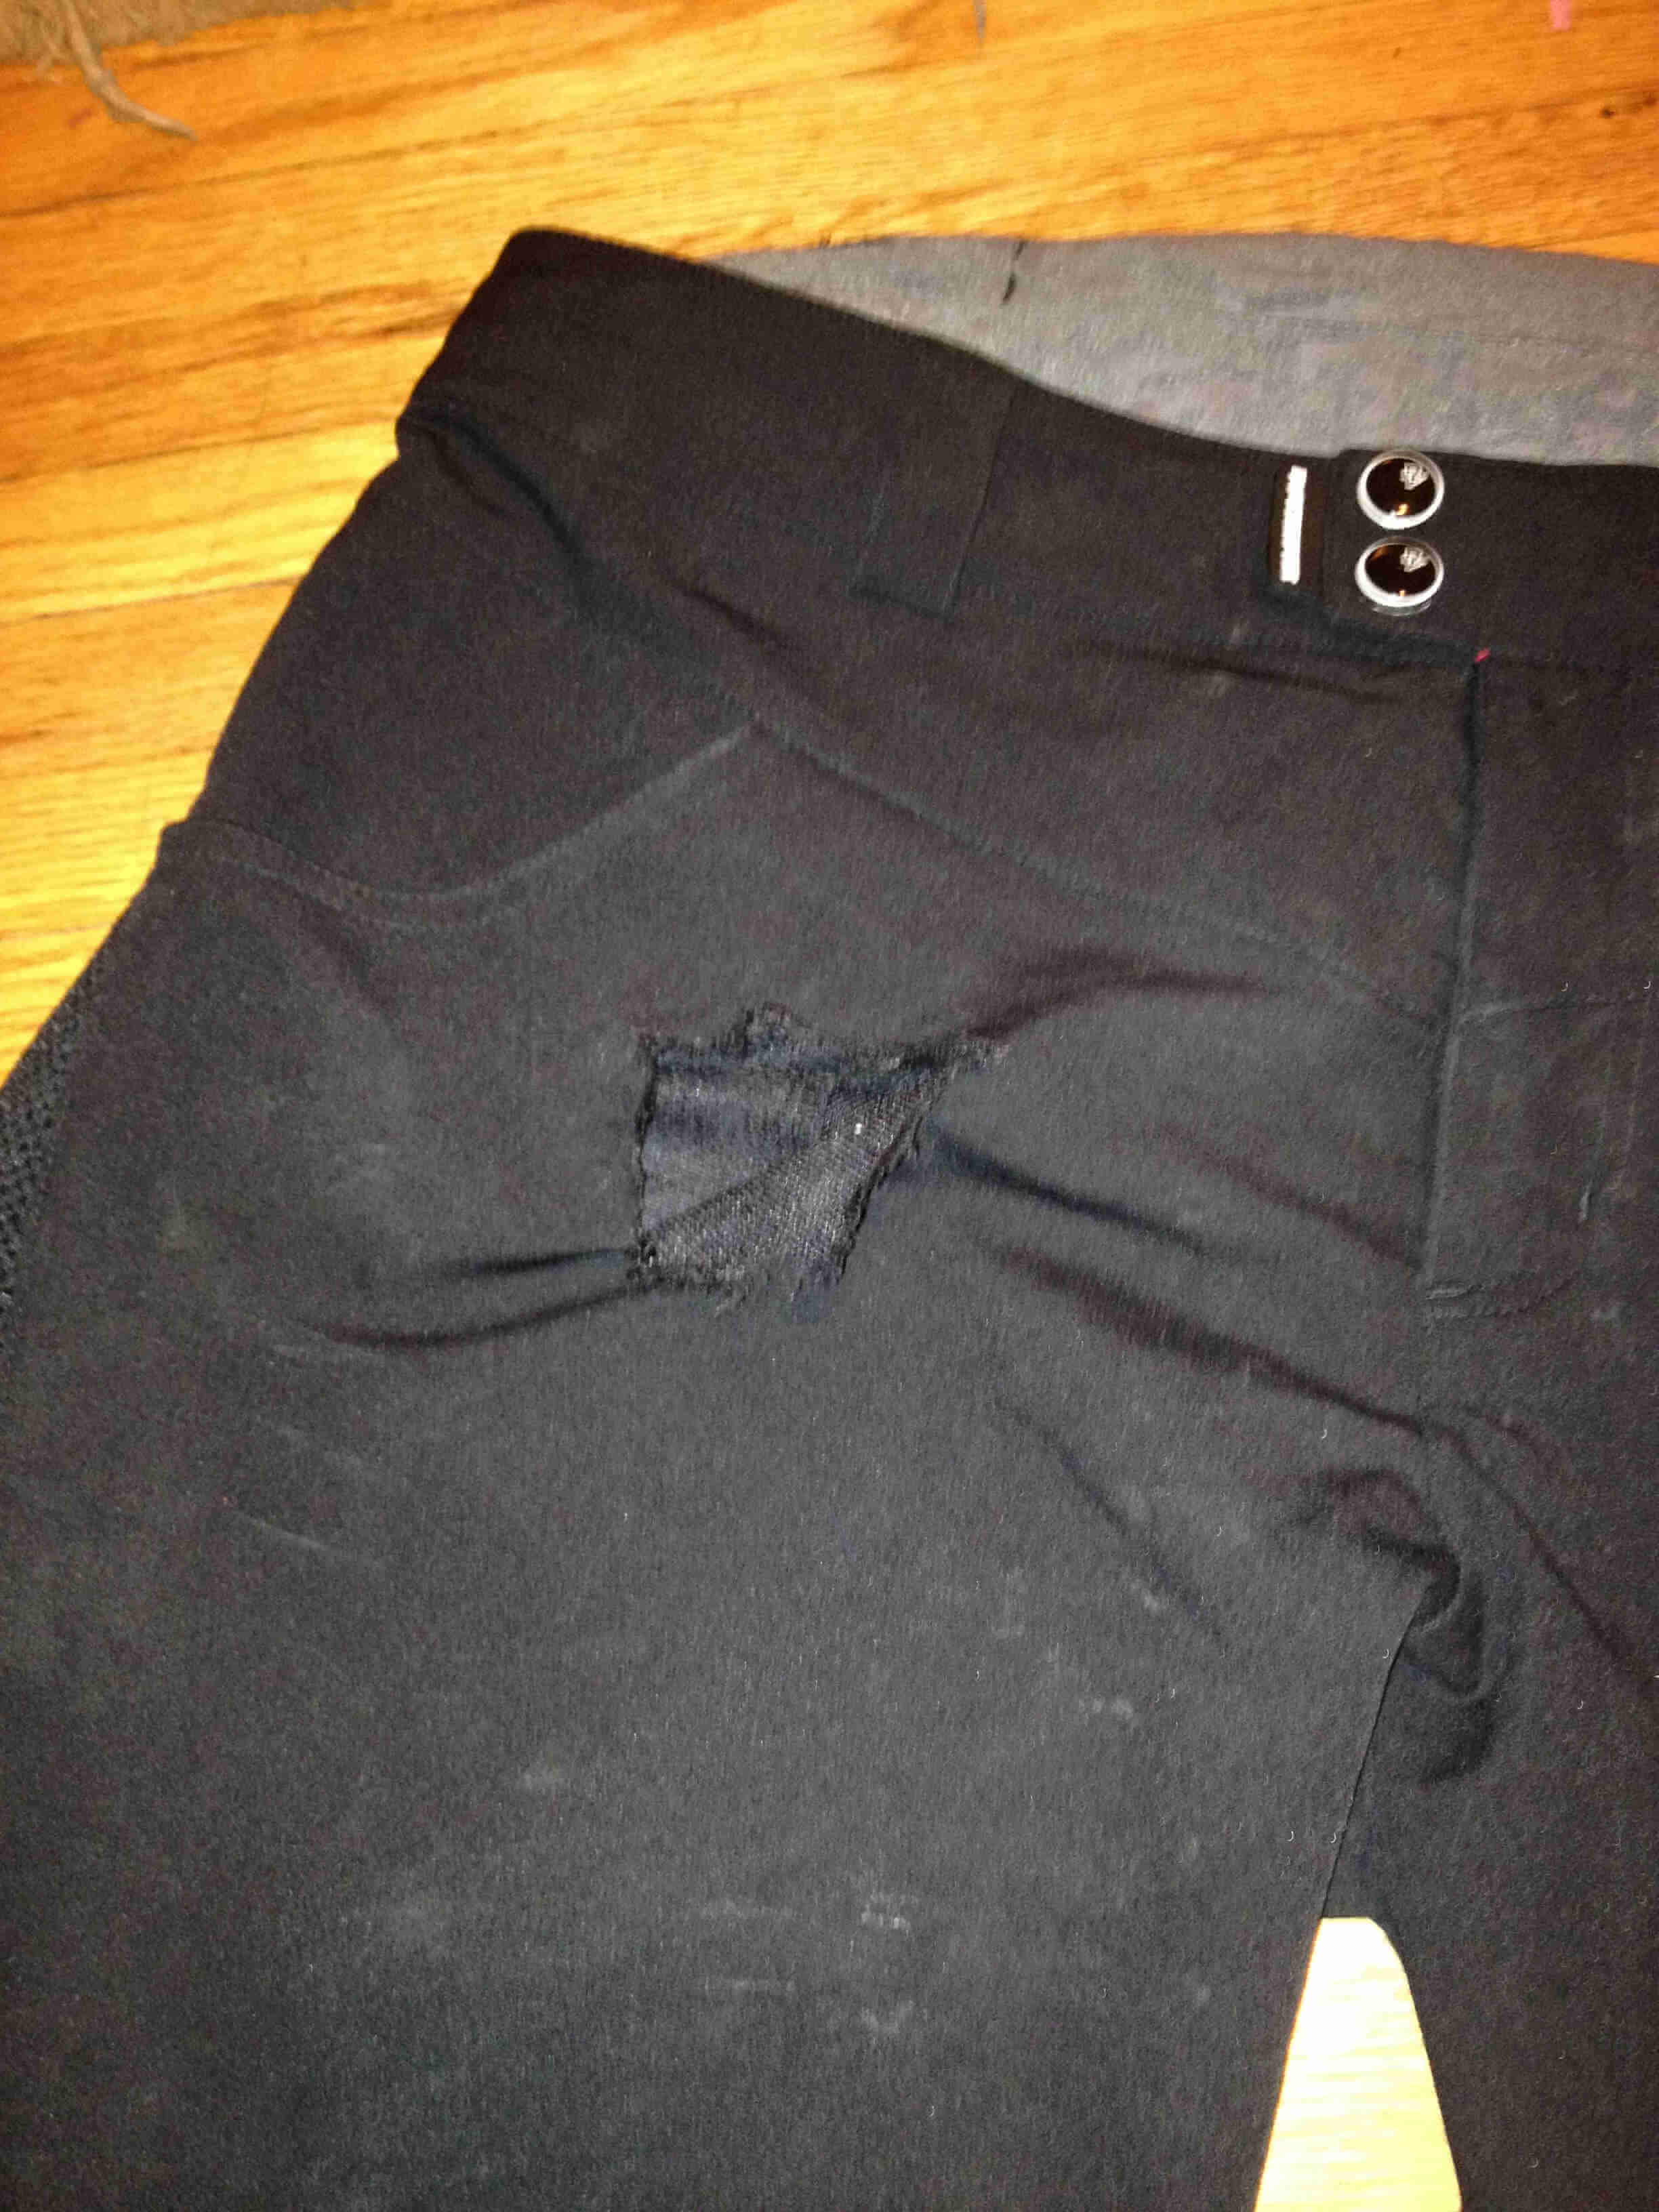 Downward, front, upper right side view of a pair of black shorts, with a tear by the right pocket